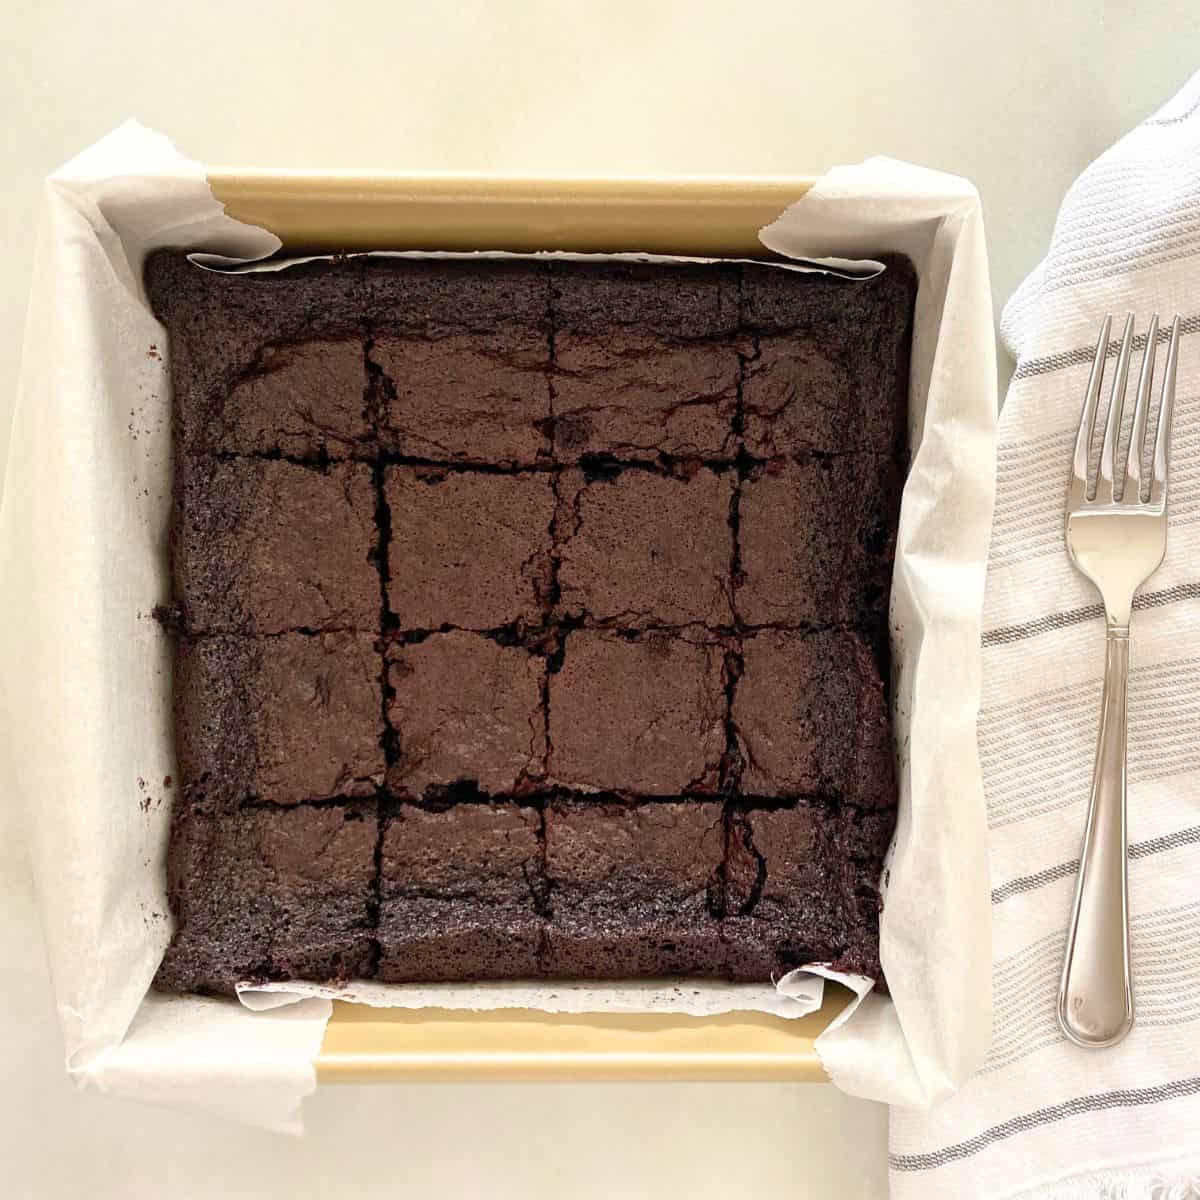 Gold cake pan with brownies cut into squares